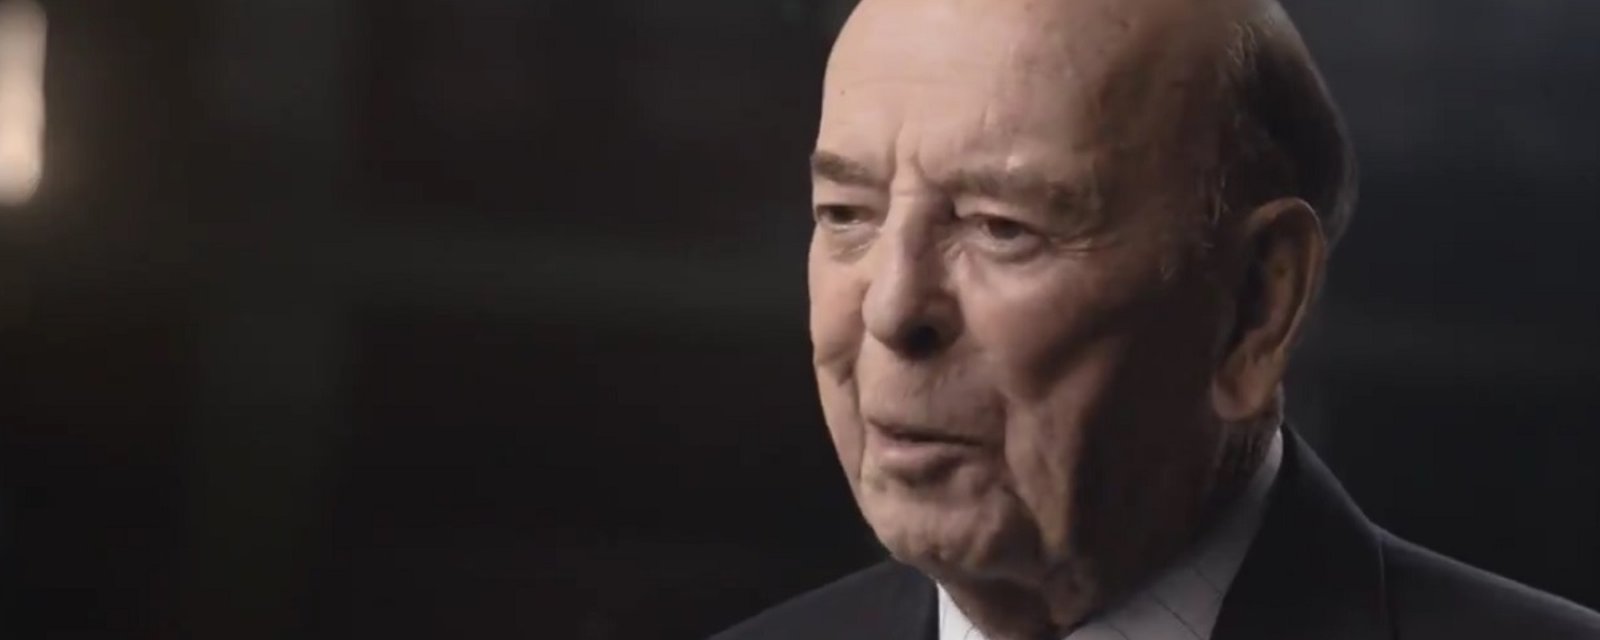 Hockey Night in Canada honors Bob Cole with a moving tribute.